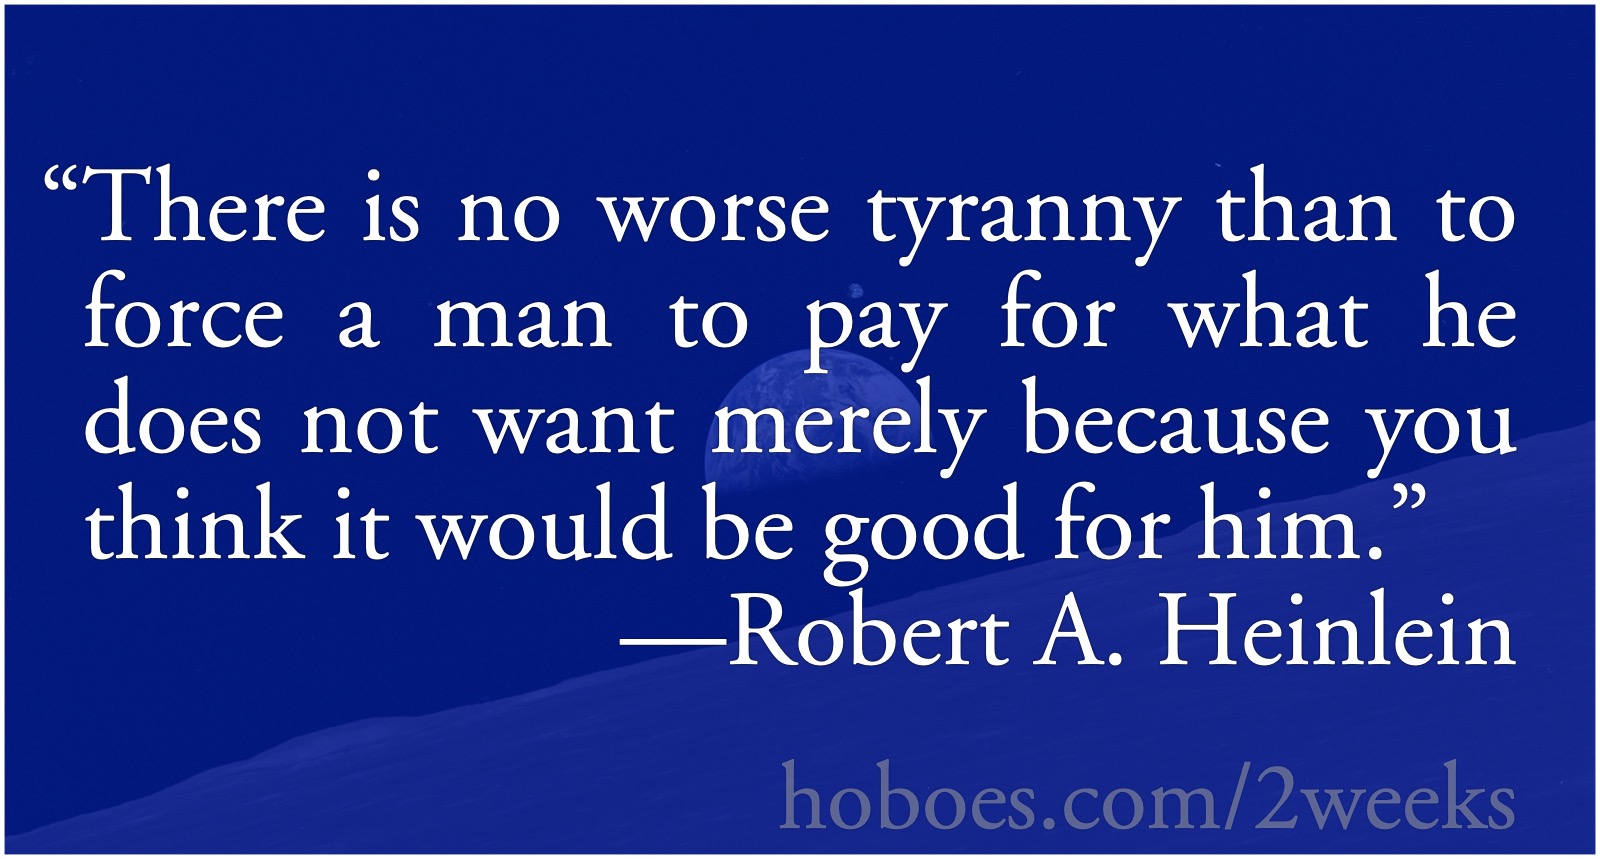 No worse tyranny: “There is no worse tyranny than to force a man to pay for what he does not want merely because you think it would be good for him.”—Heinlein; tyranny of experts; Robert A. Heinlein; Wokescolds; Social Justice Warriors, Finger Nannies, Antifa